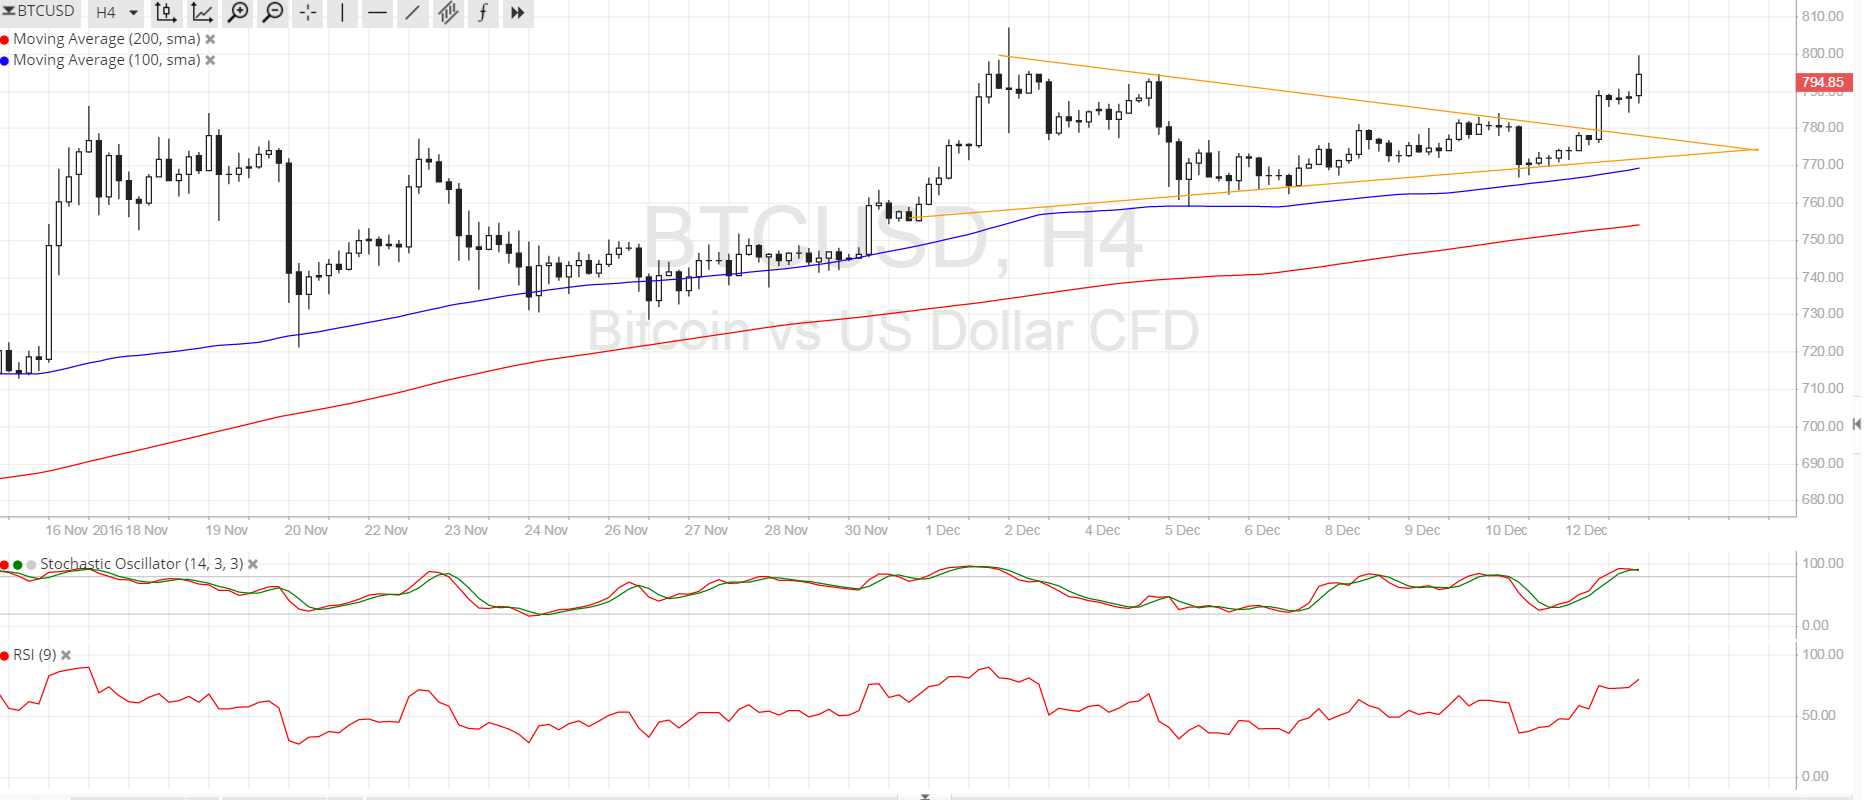 Bitcoin Price Technical Analysis for 12/13/2016 - Here Come the Bulls!